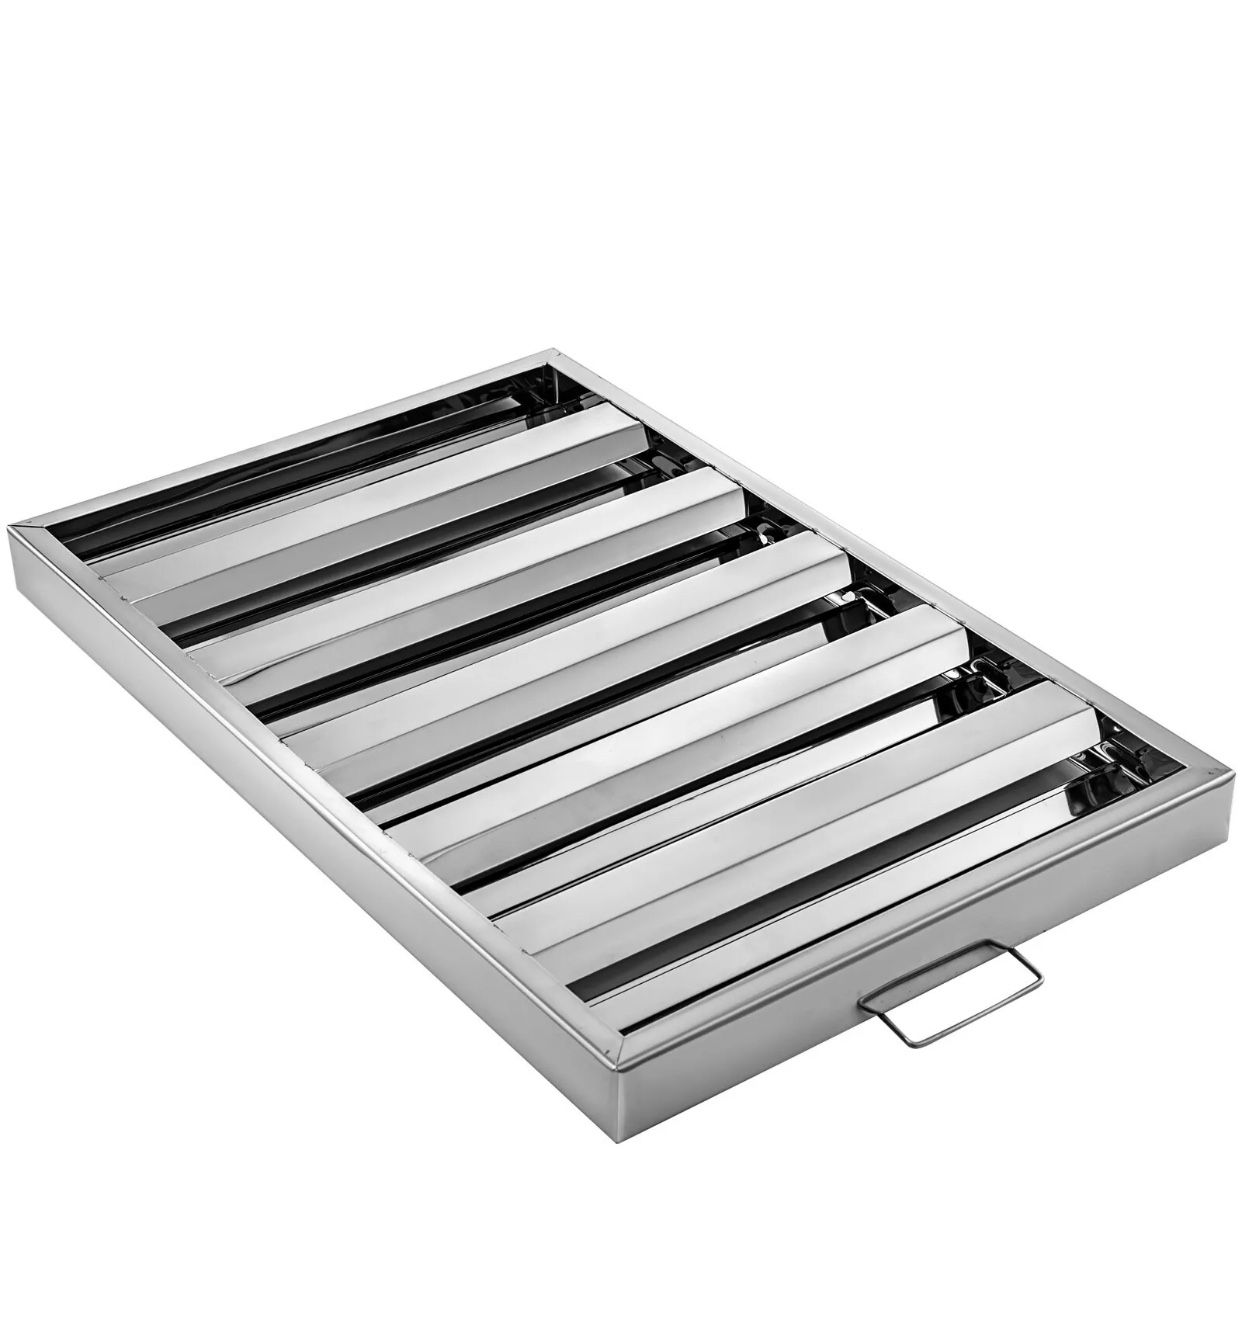 Box of 6 Hood Filter/Grease Baffle 15.5"W X 24.5H Stainless Steel Commercial Range